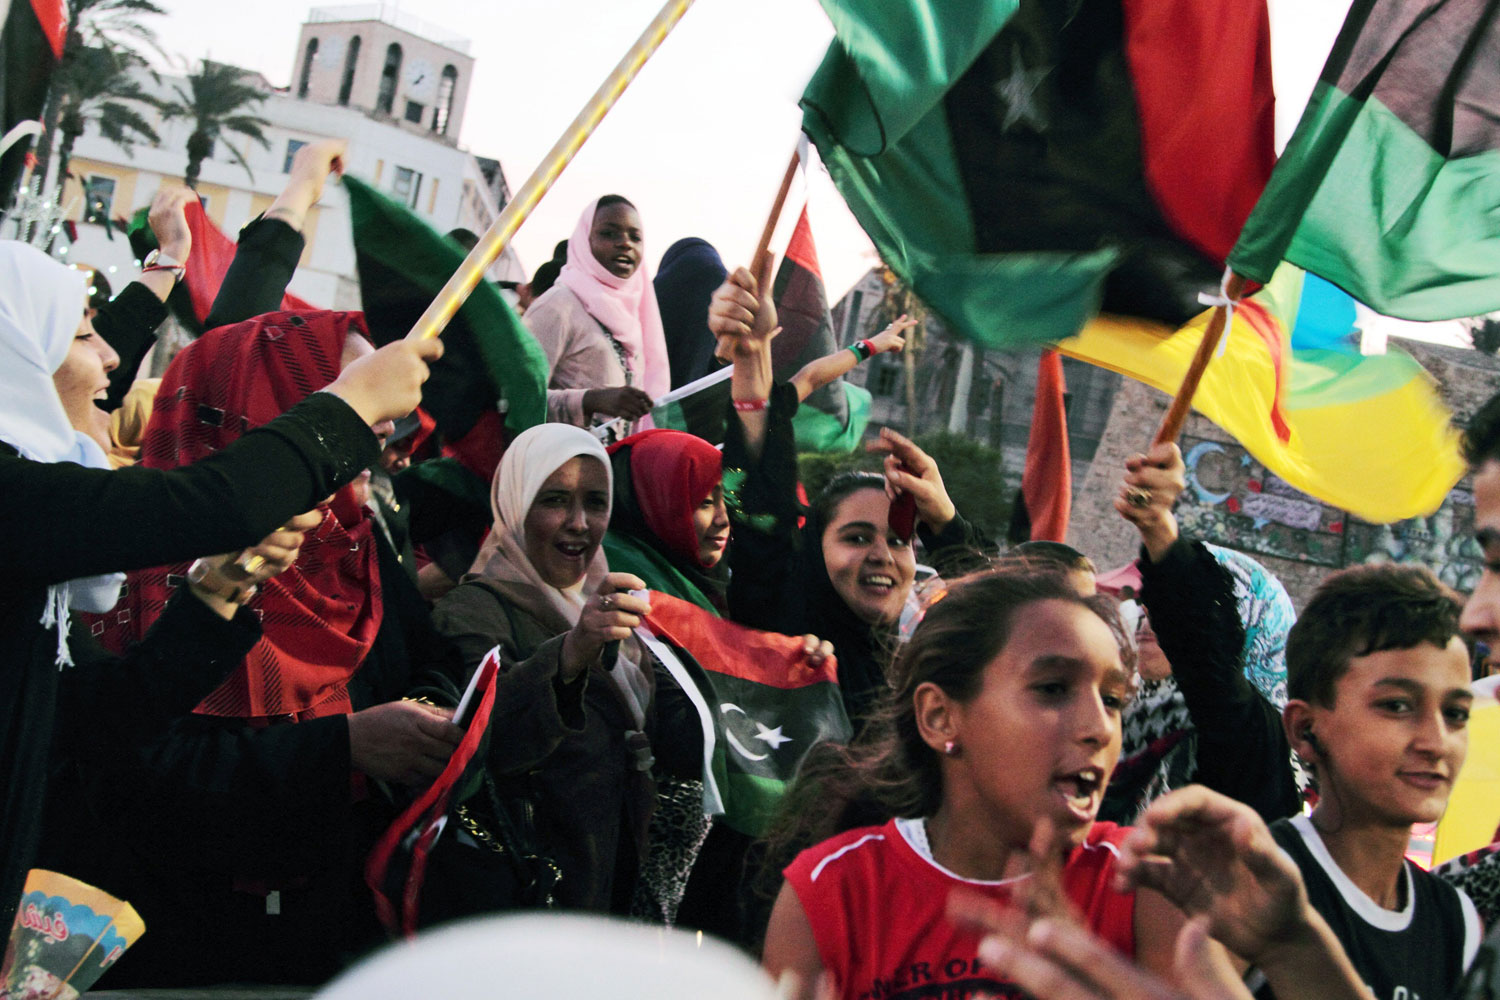 Image: Oct. 23, 2012. Libyans celebrate the one year anniversary of liberation from former dictator Muammar Gaddafi, at Martyrs Square in Tripoli, Libya.